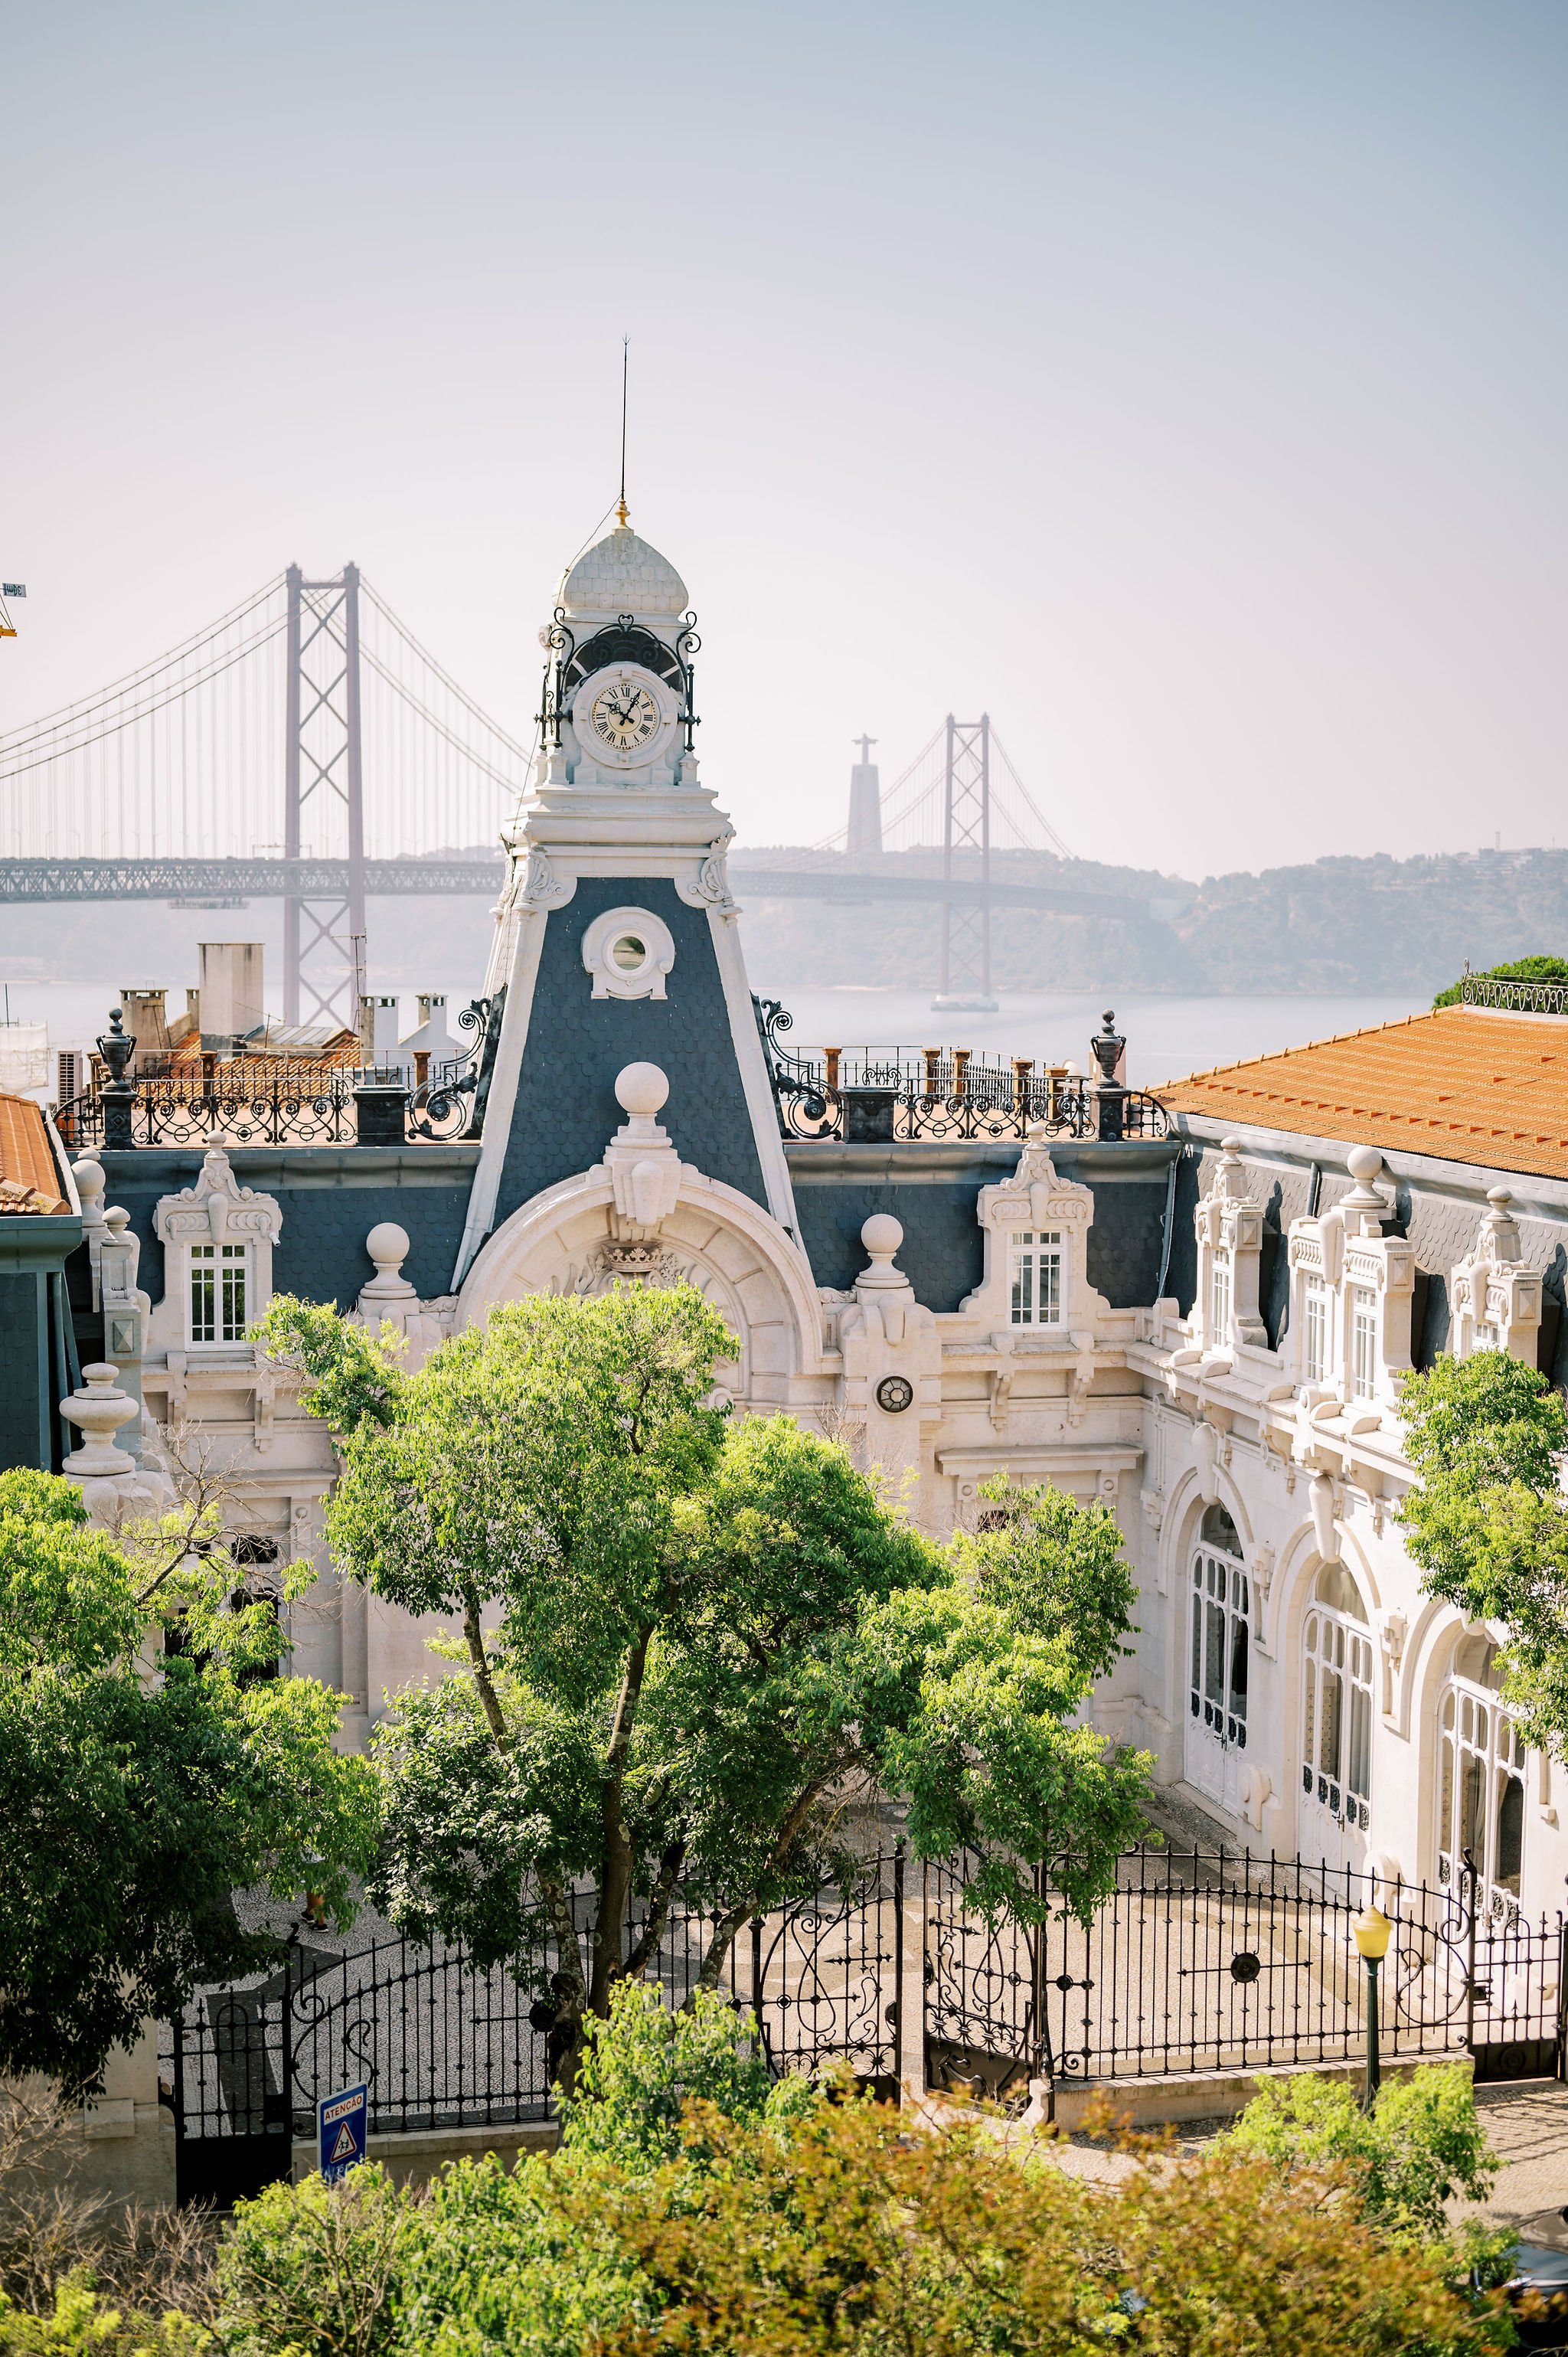 A rare view of Pestana Palace, showing the decorative tower of the building and the 25 Avril Bridge above the river Tejo and the Cristo Rei statue in the background 